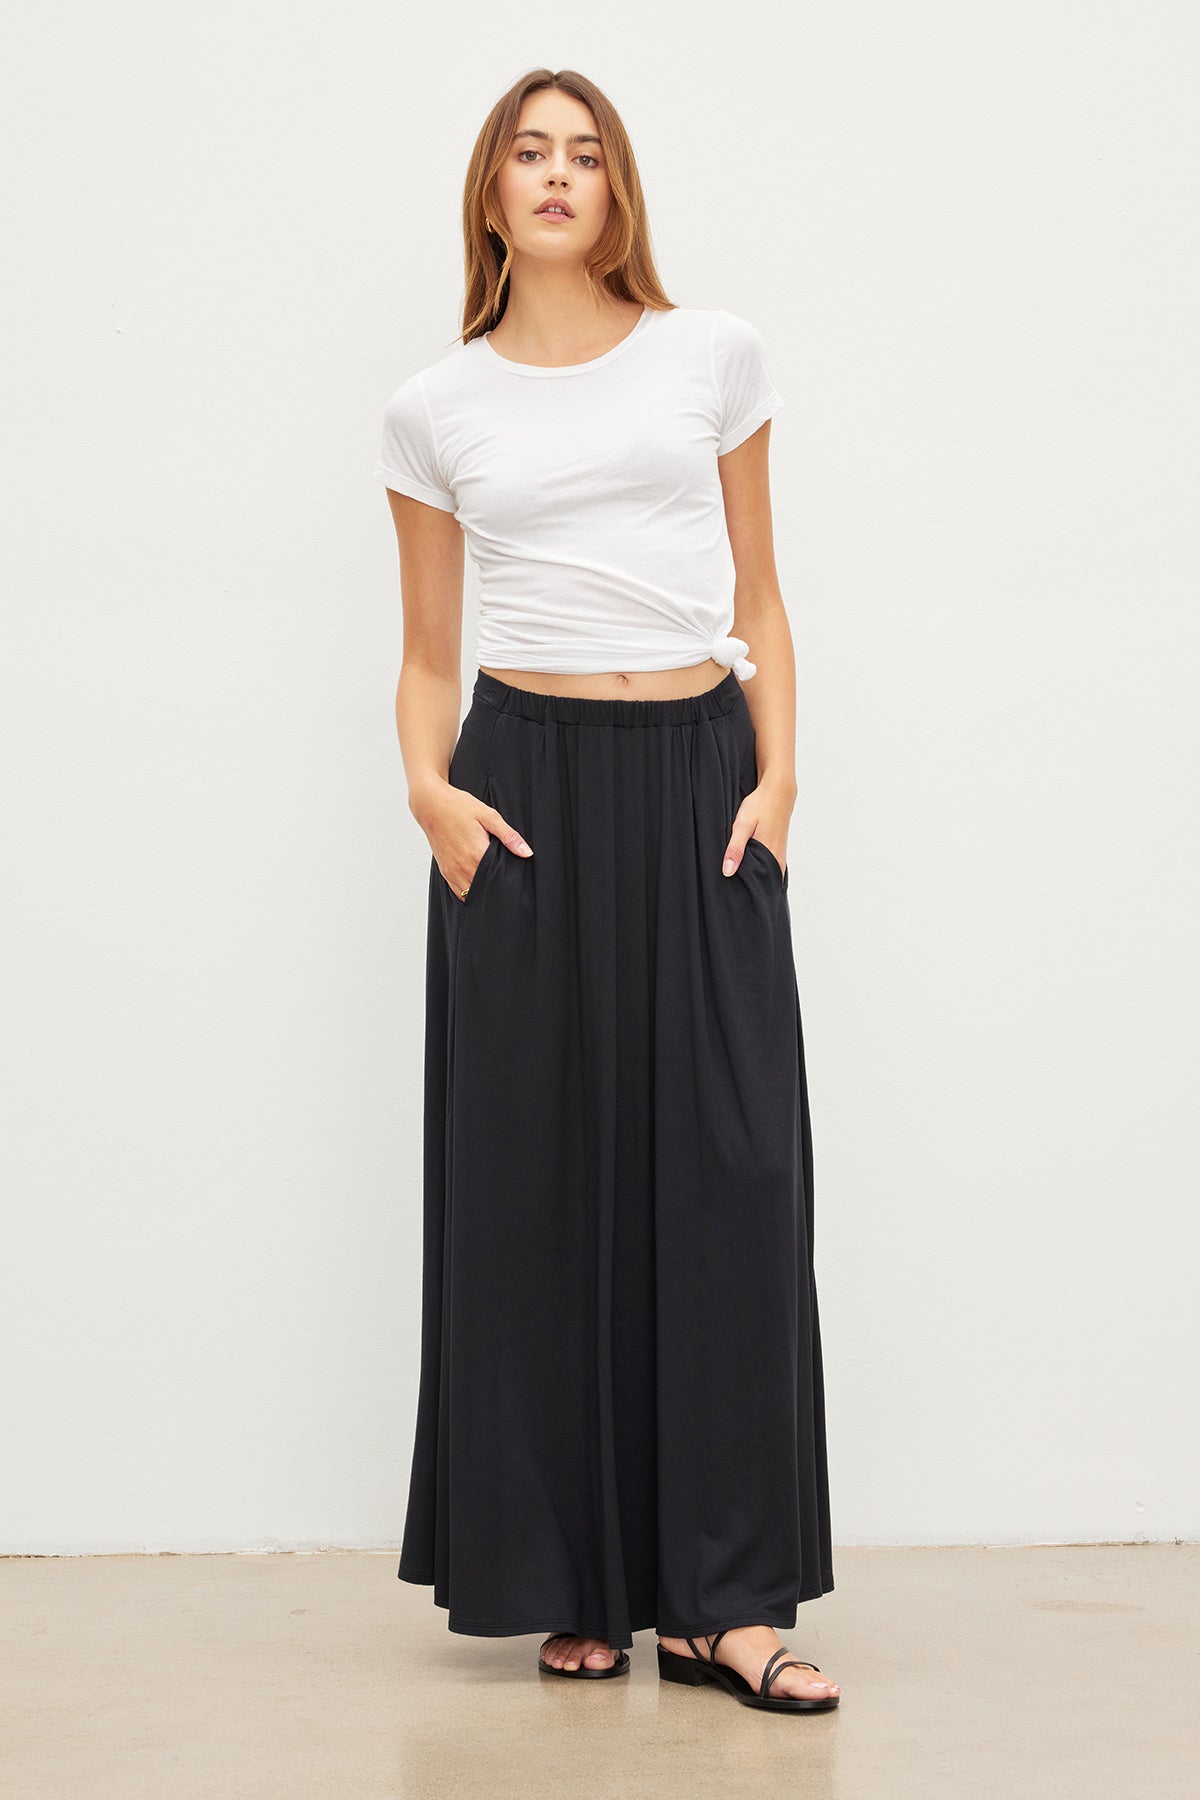 A woman wearing a Velvet by Graham & Spencer JEMMA GAUZY WHISPER FITTED CREW NECK TEE and black long skirt.-35416739709121